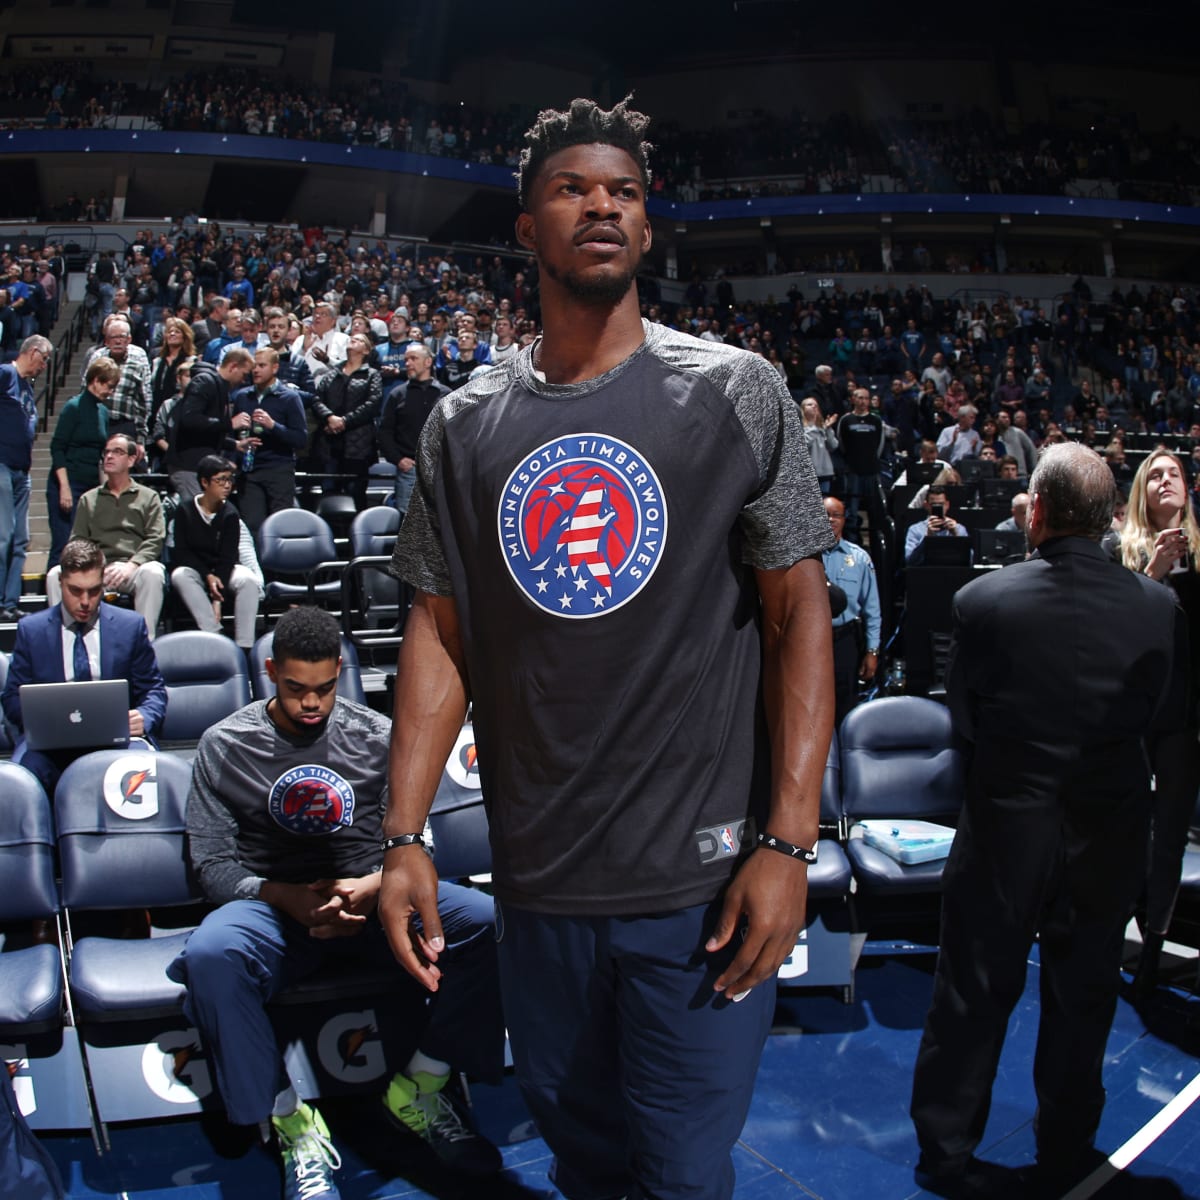 Jimmy Butler is having the postseason of his life - Sports Illustrated